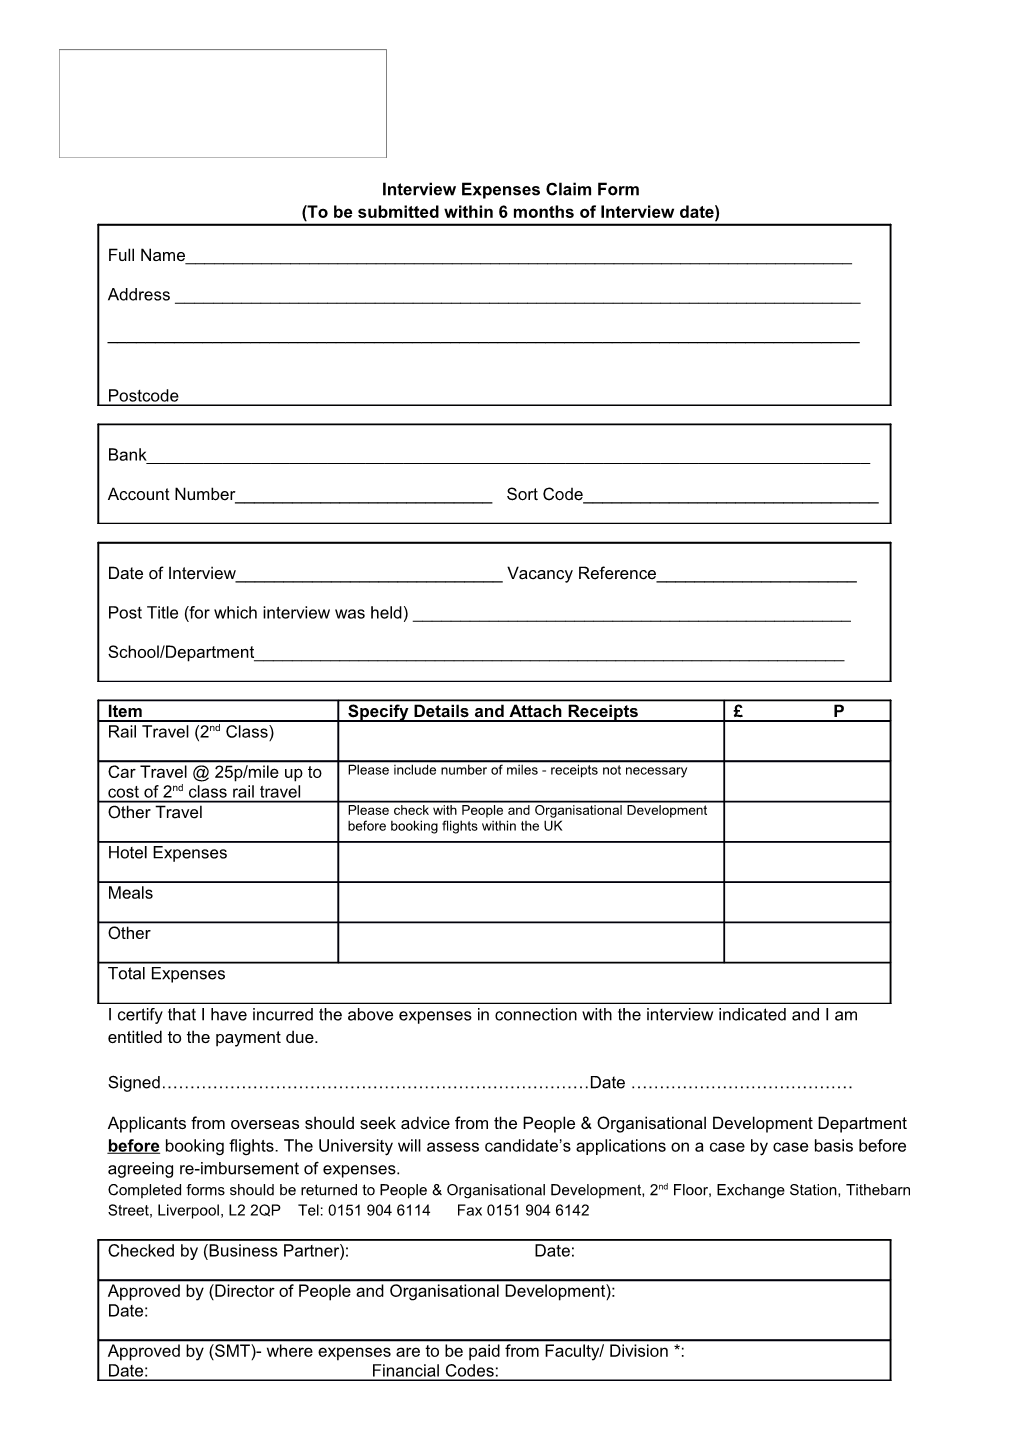 Interview Expenses Claim Form